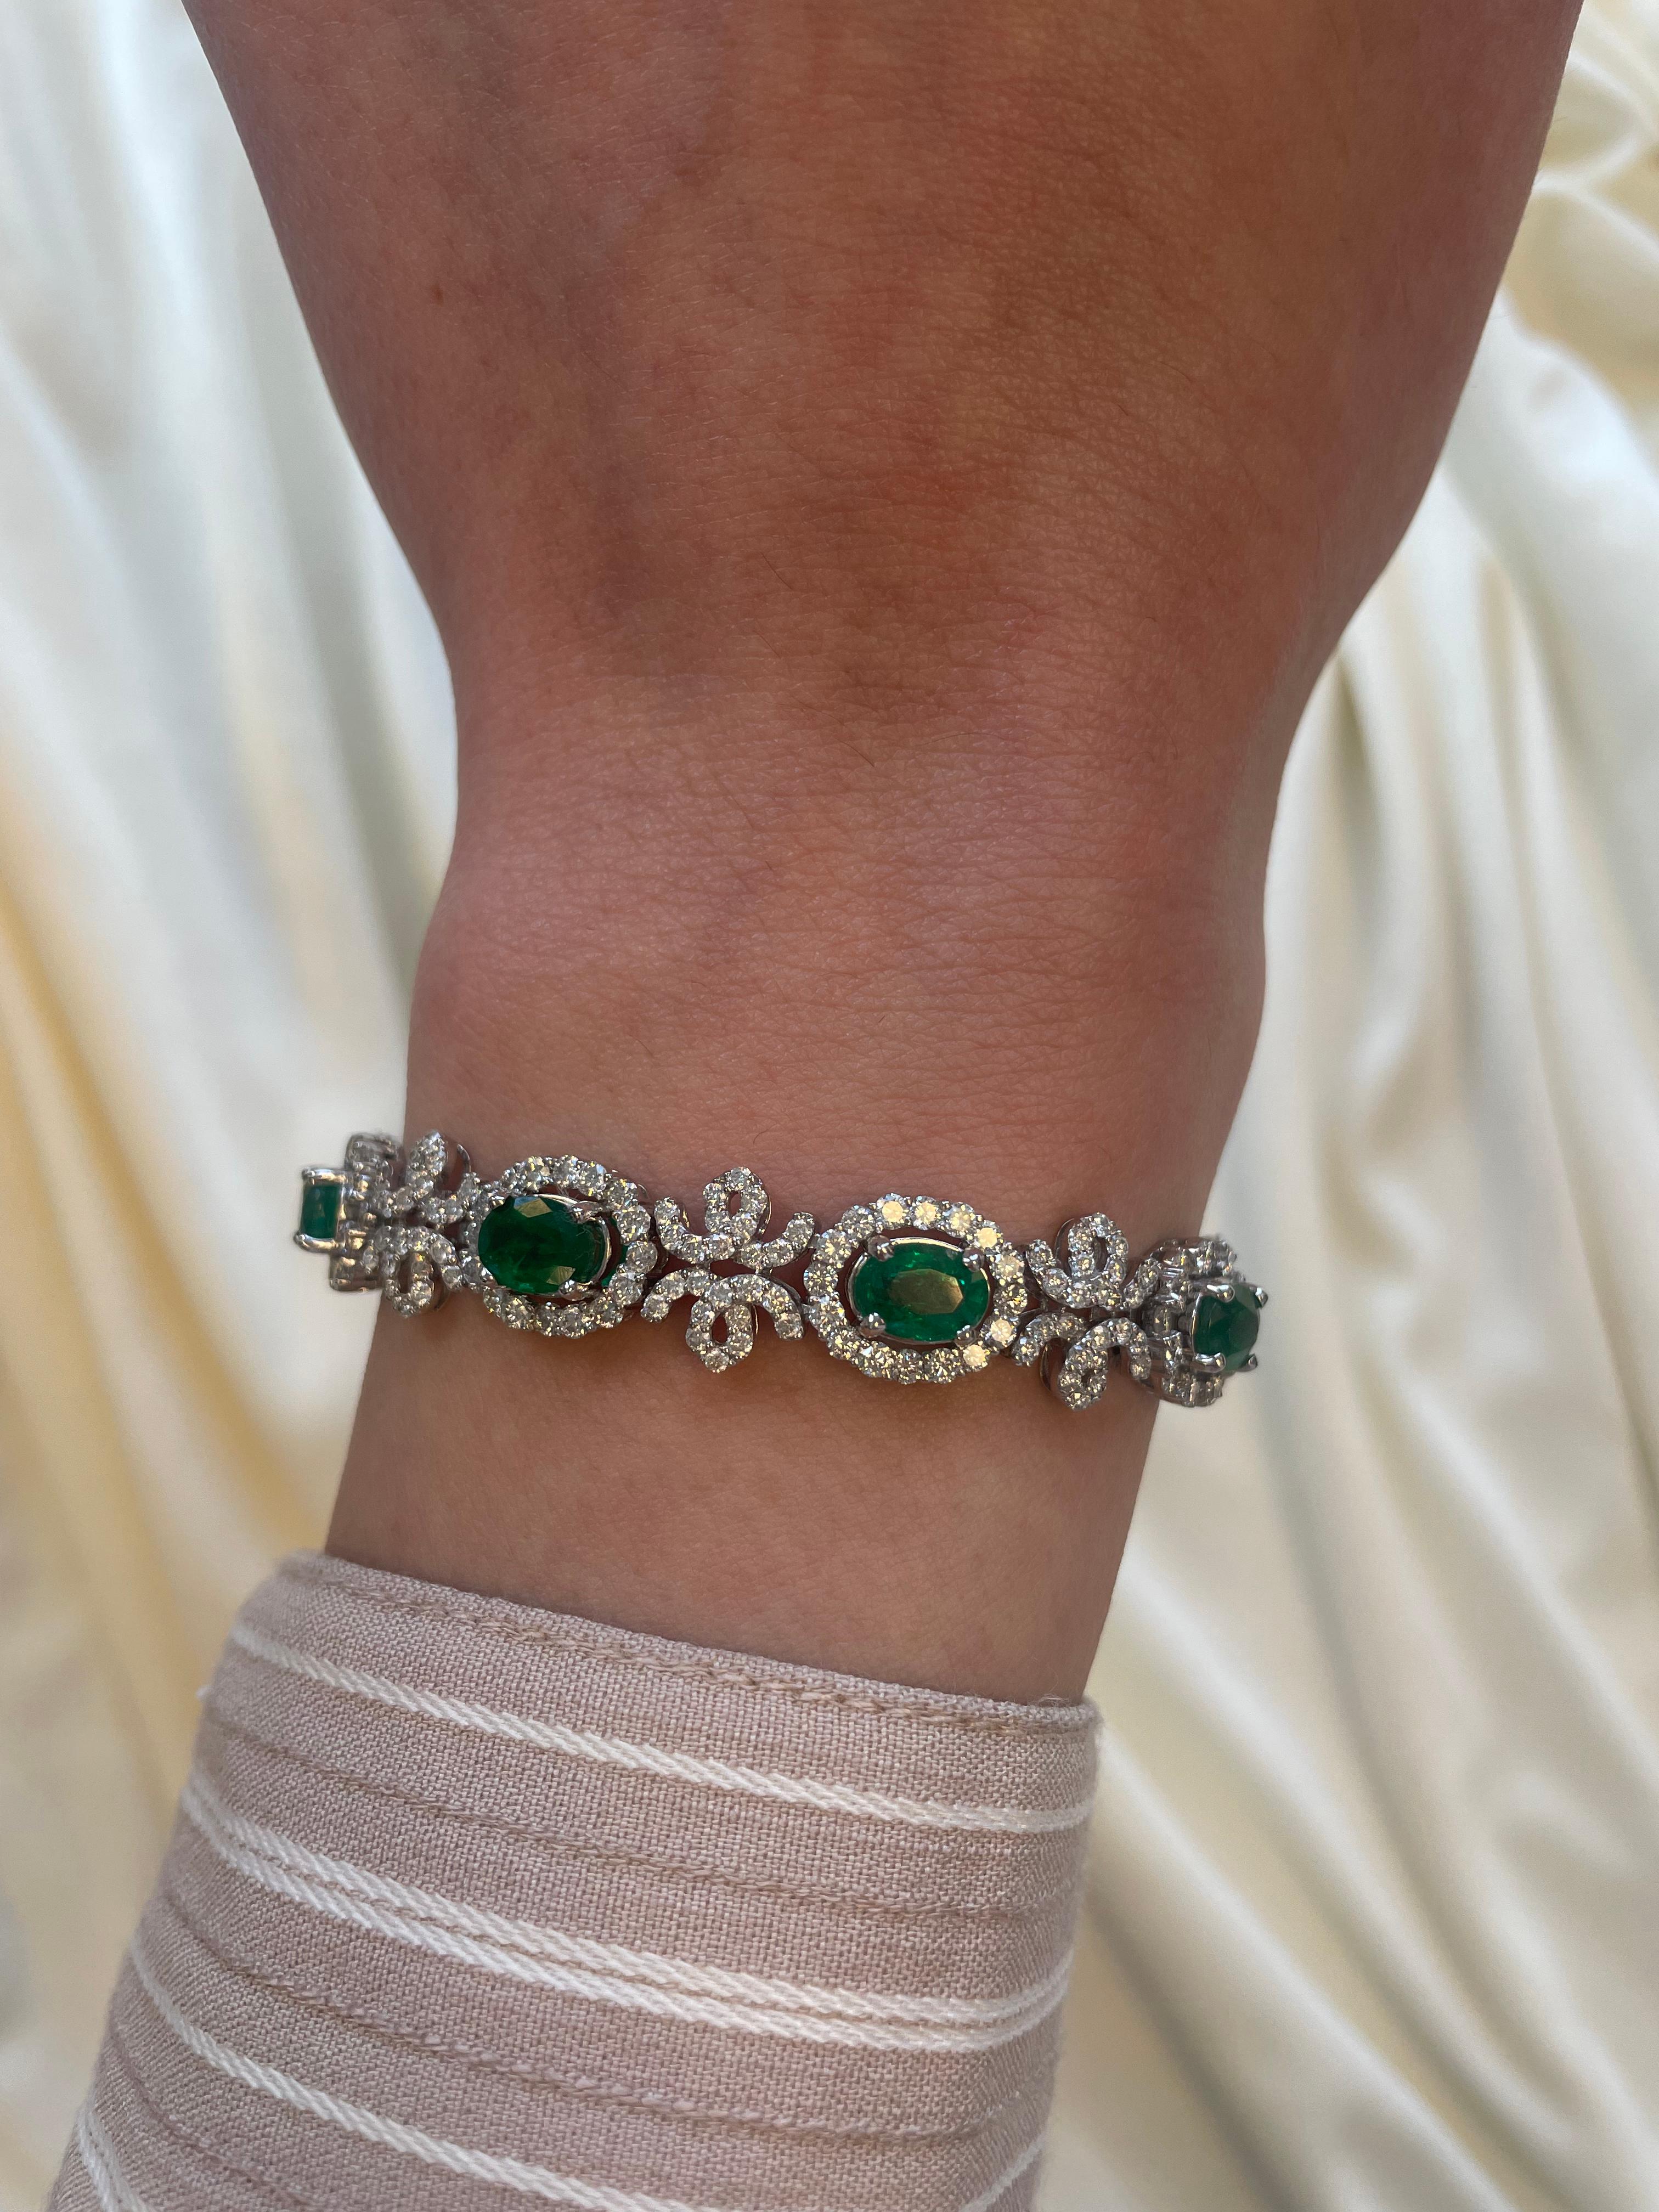 Exquisite and elegant emerald and diamond bracelet.
13.22 carats total gemstone weight.
9 oval cut emeralds, approximately F2, 6.73 carats. Complimented by 364 round brilliant diamonds, 6.49 carats. Approximately G/H color and VS2/SI1 clarity. 18k